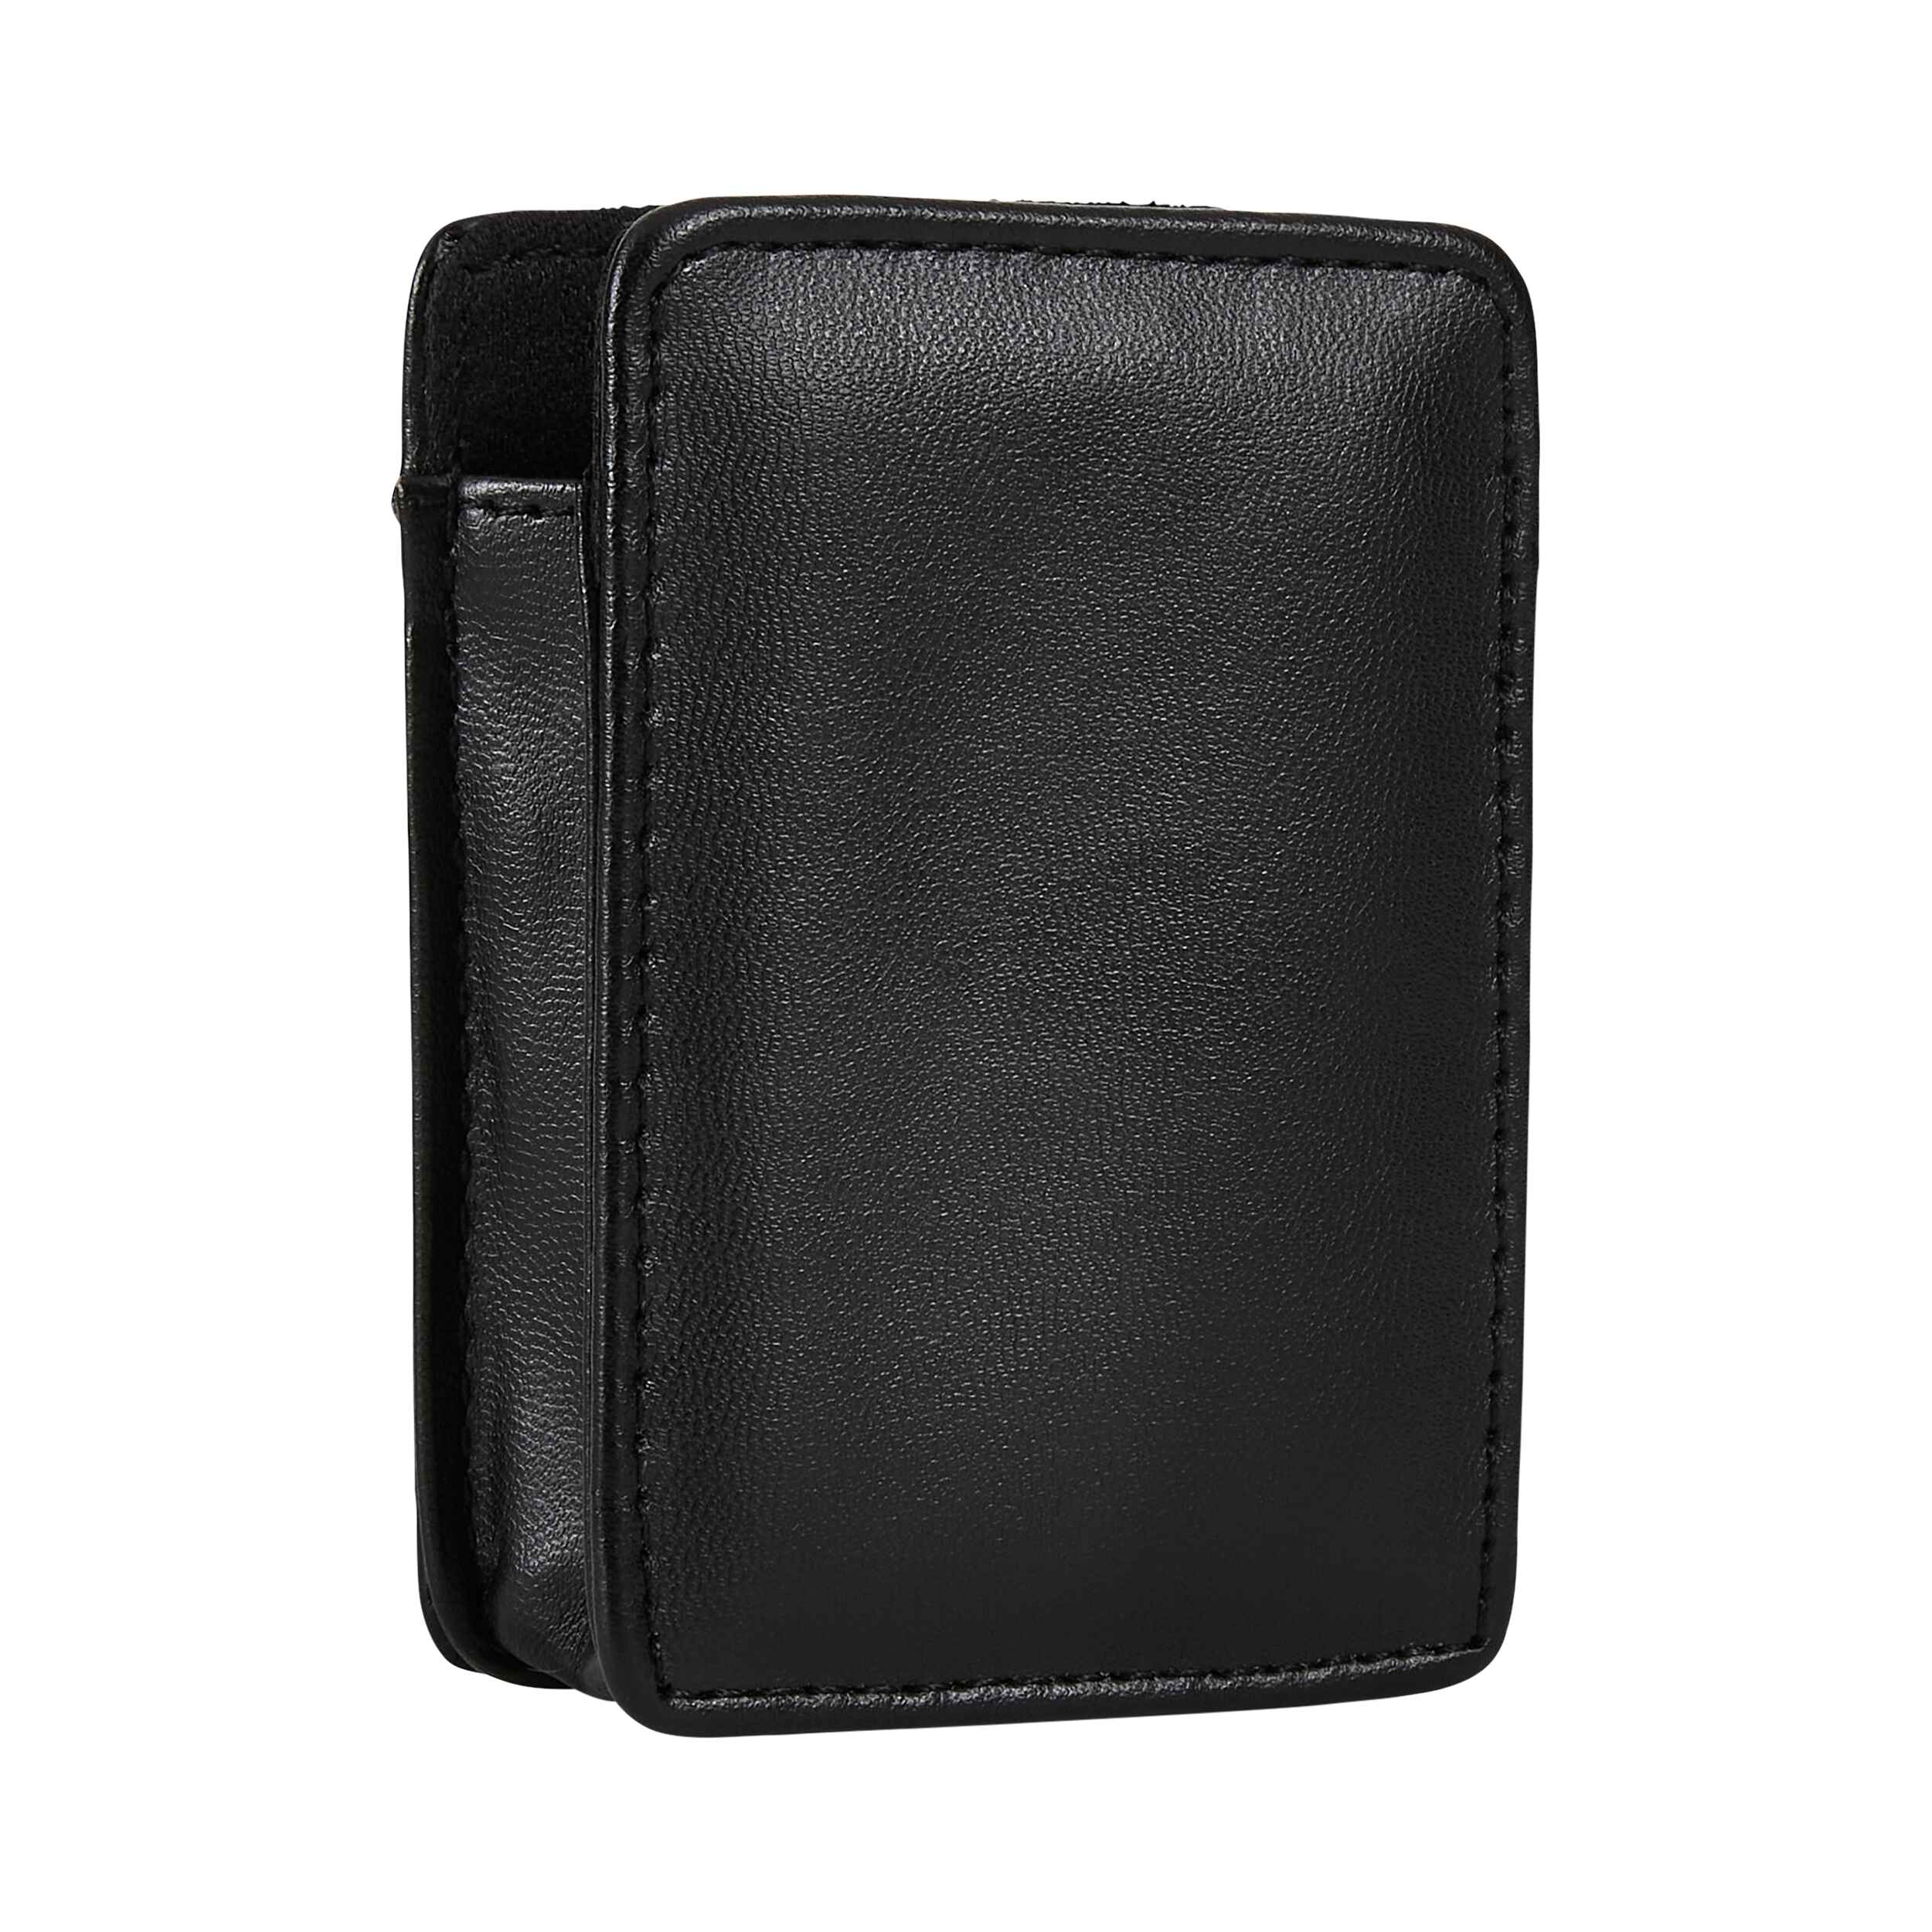 LaserCap belt clip leather pouch holder for powerpack front side